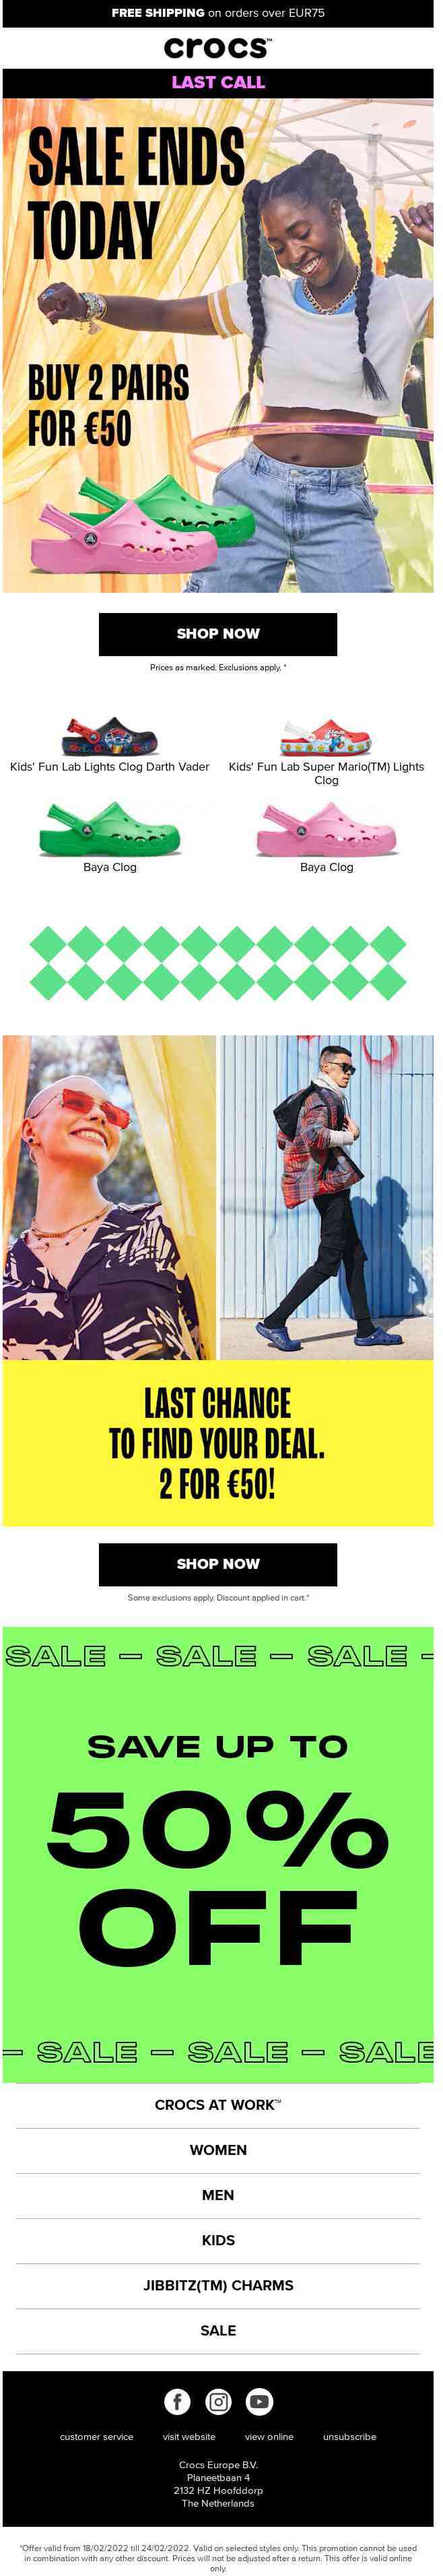 Last chance to find your deal. 2 for €50!